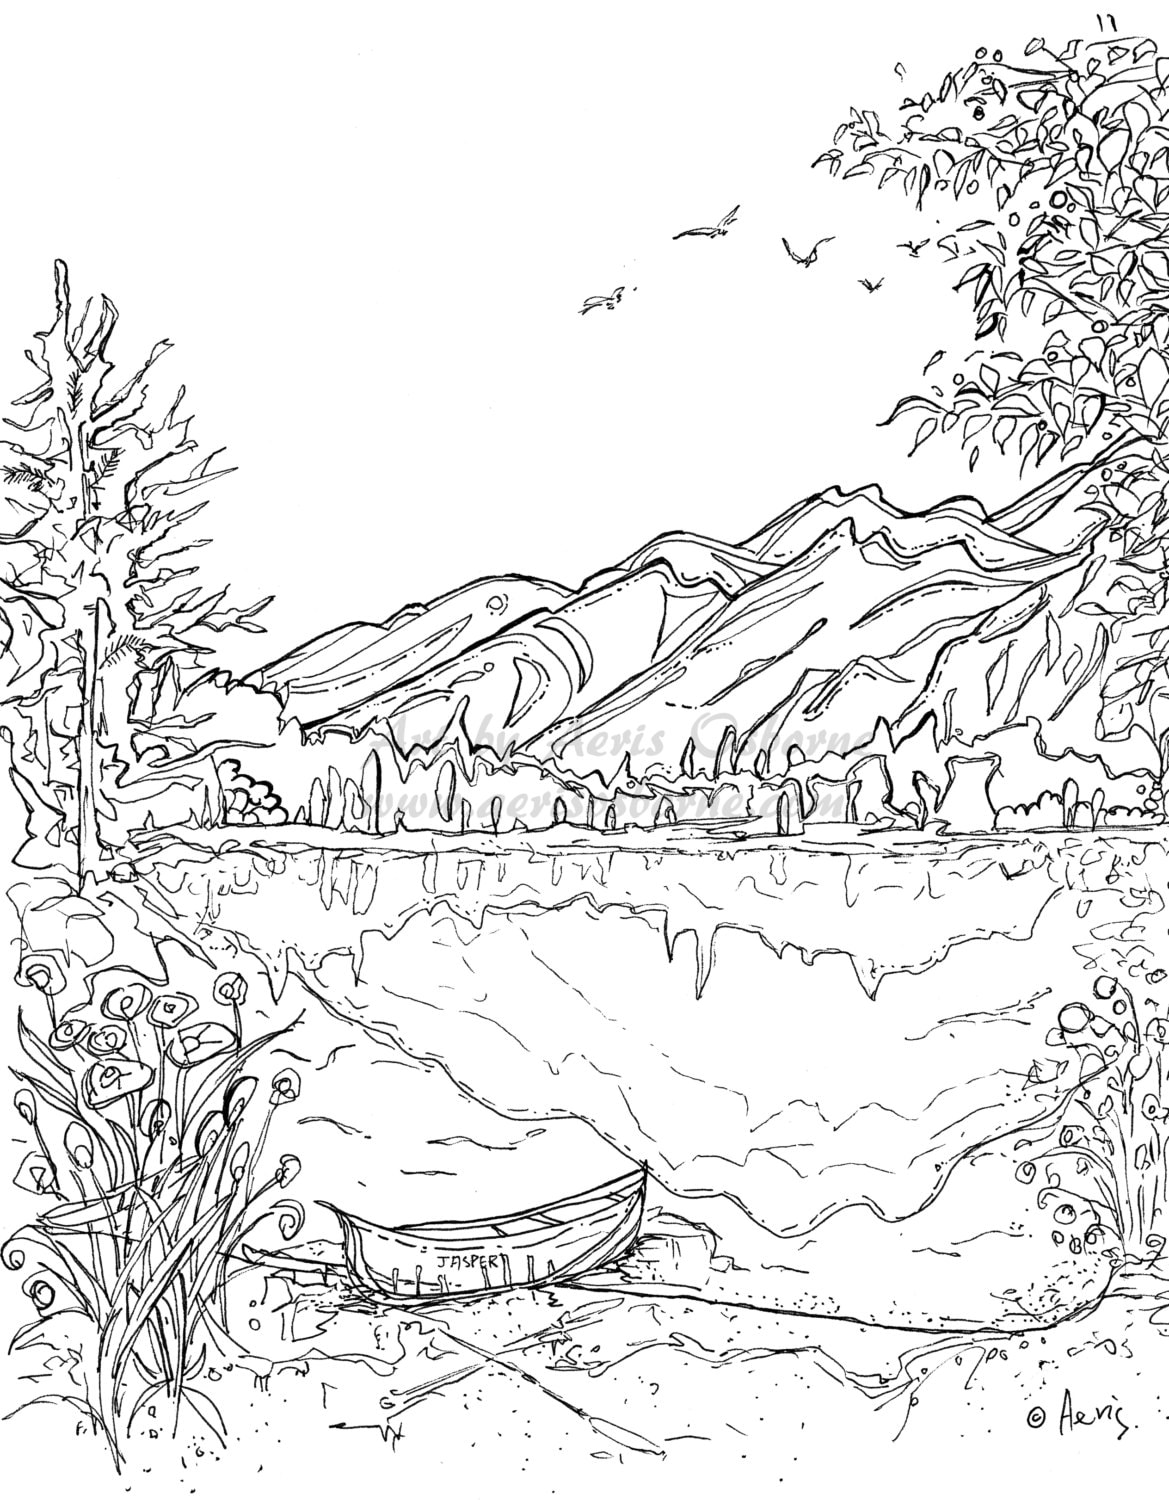 New Landscape Coloring Pages to Print Thousand of the Best printable